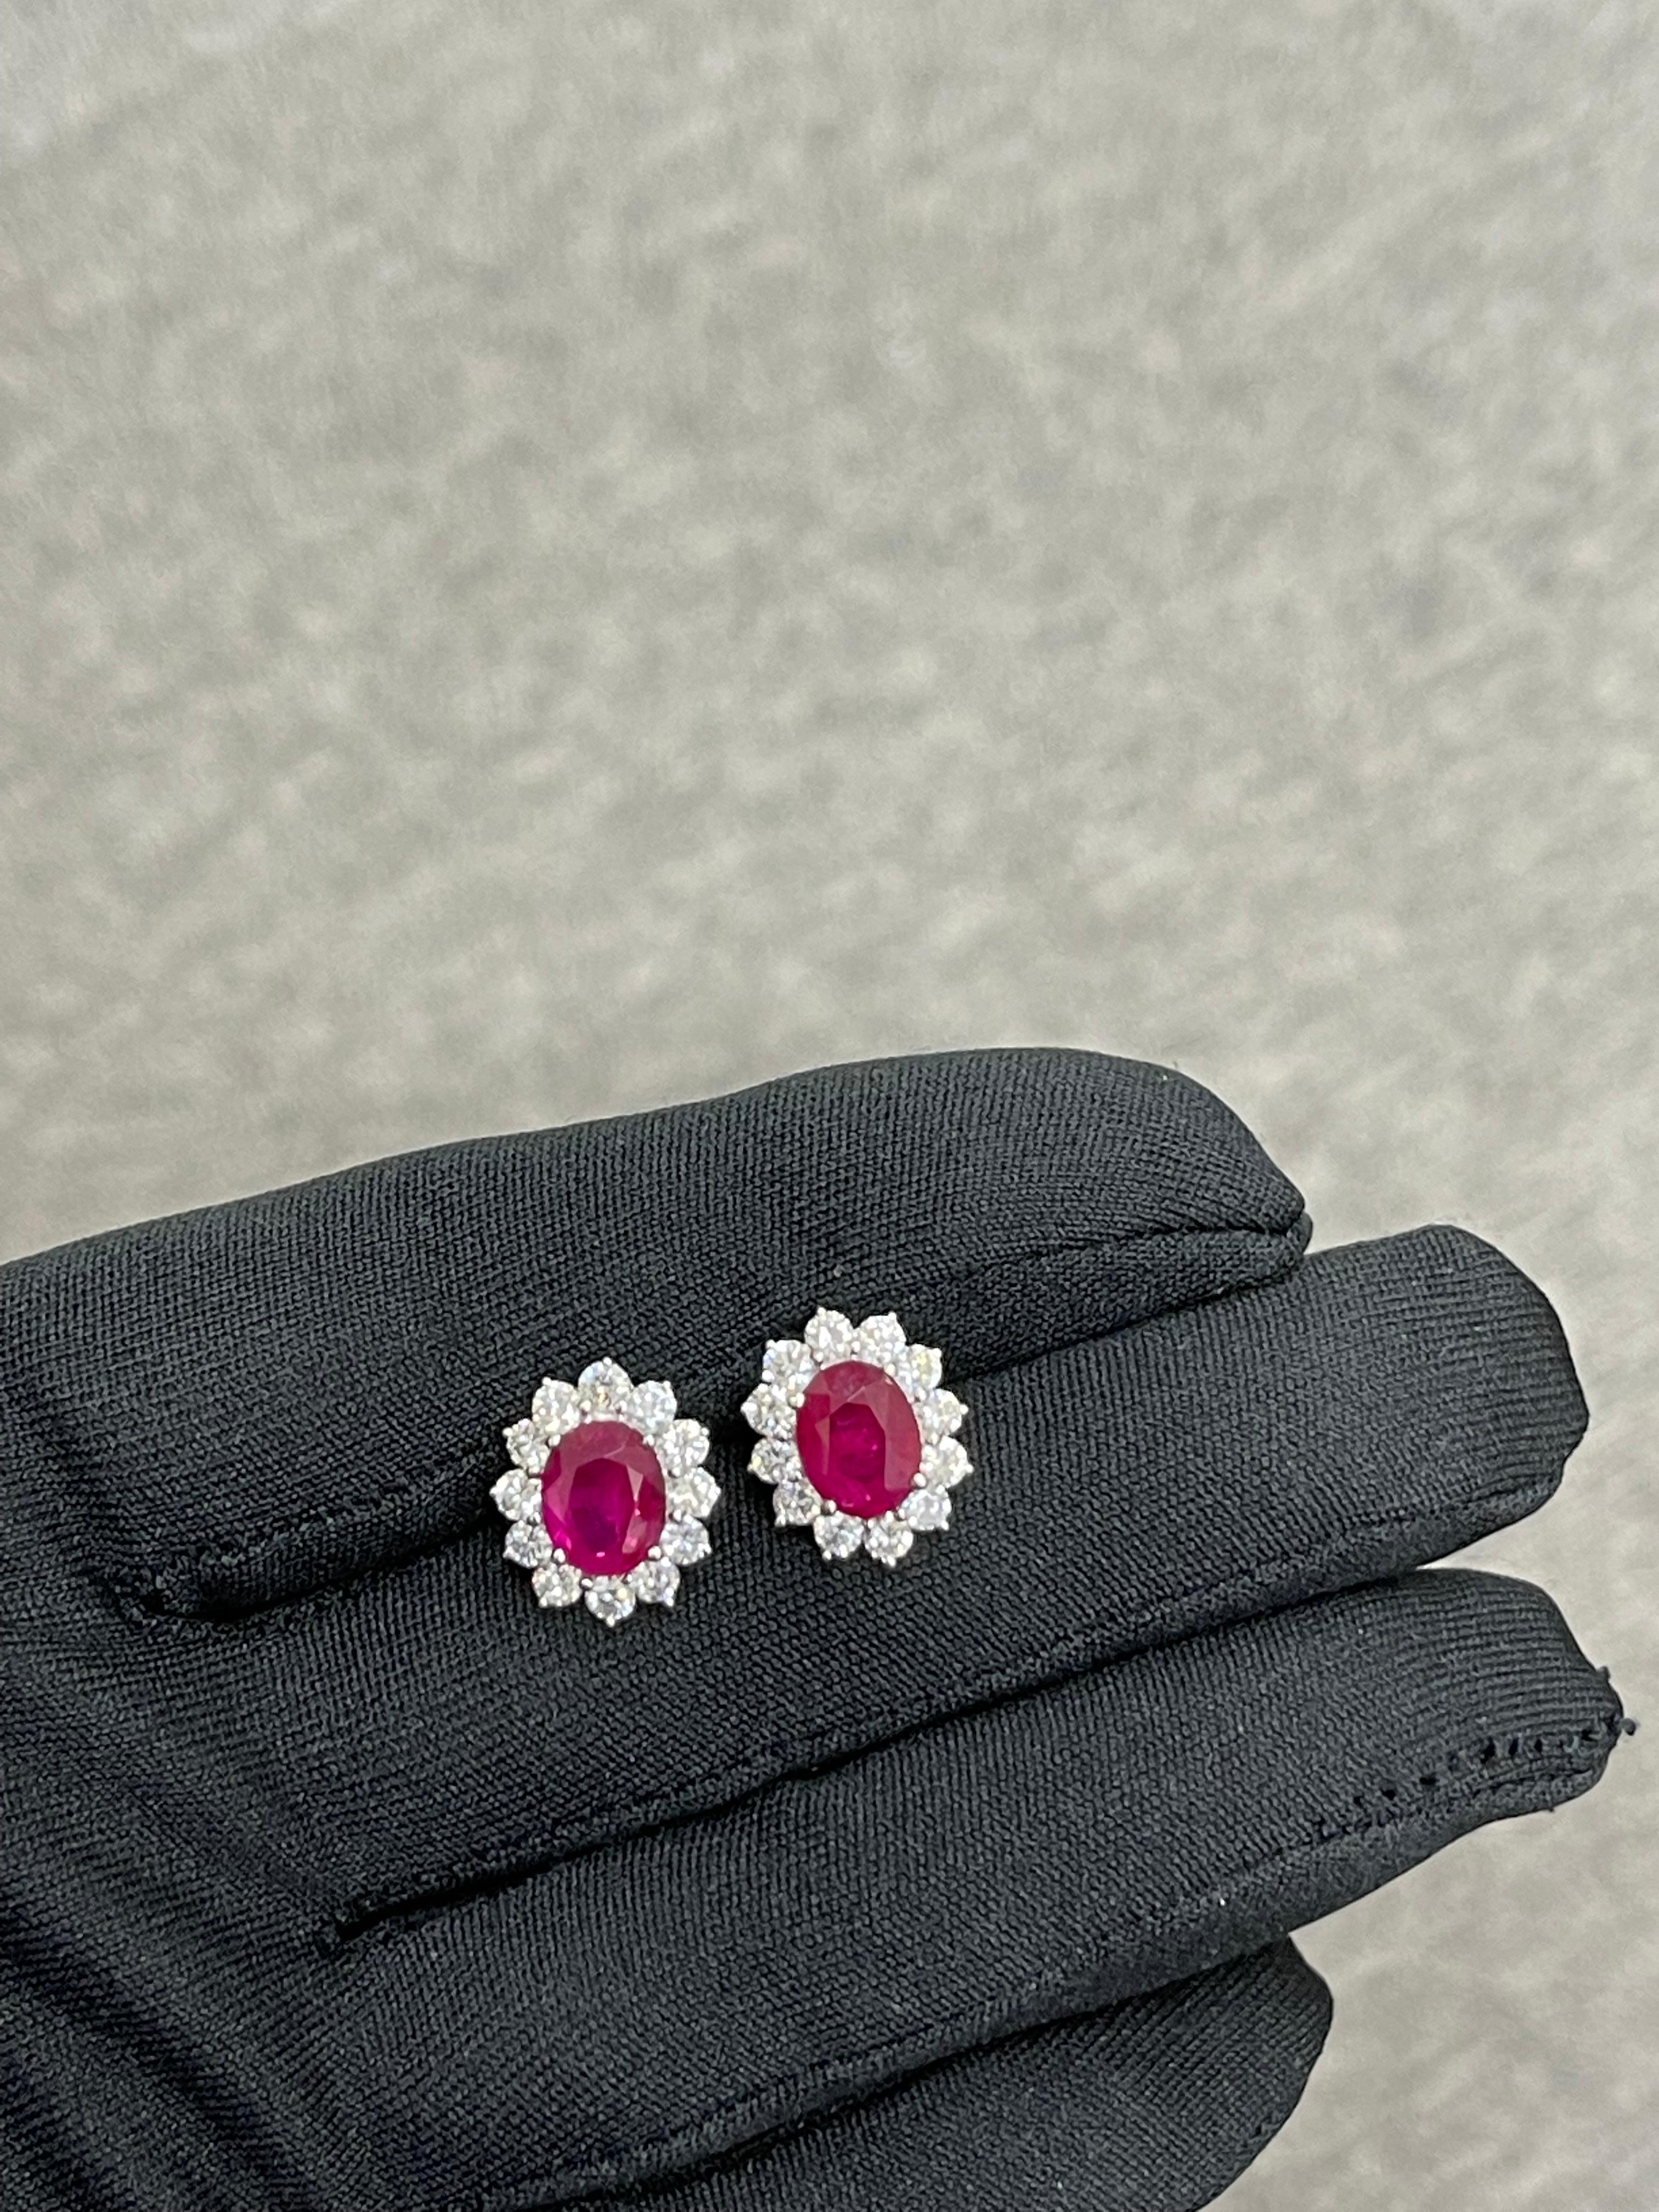 Vivid Red Ruby 4.00 CTW & Diamond Stud Earrings, Close to Pigeon Blood Red 2